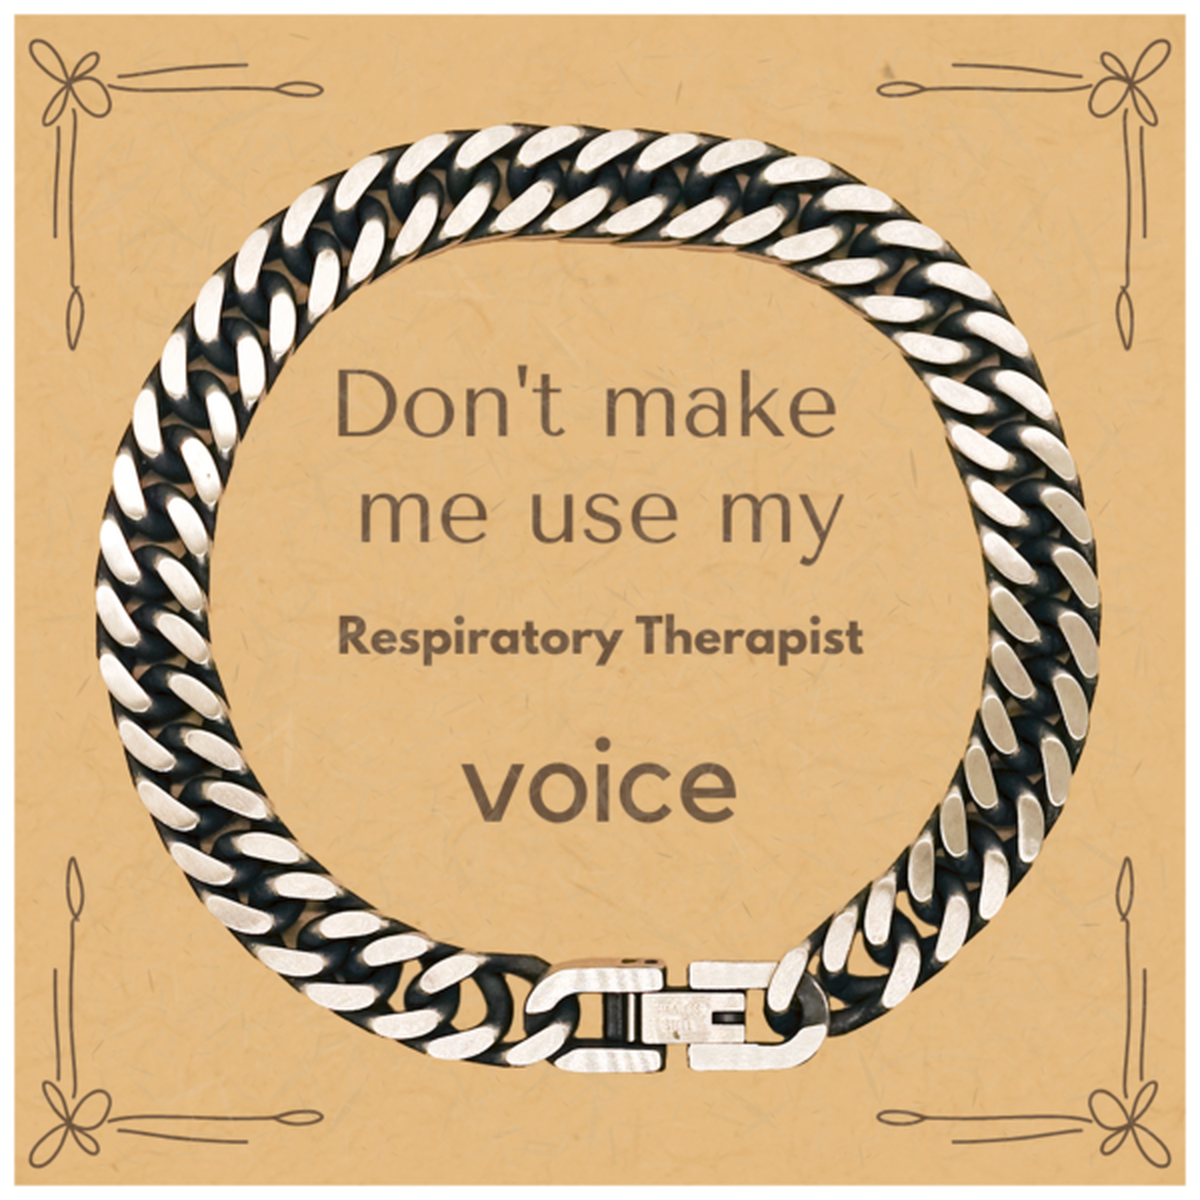 Don't make me use my Respiratory Therapist voice, Sarcasm Respiratory Therapist Card Gifts, Christmas Respiratory Therapist Cuban Link Chain Bracelet Birthday Unique Gifts For Respiratory Therapist Coworkers, Men, Women, Colleague, Friends